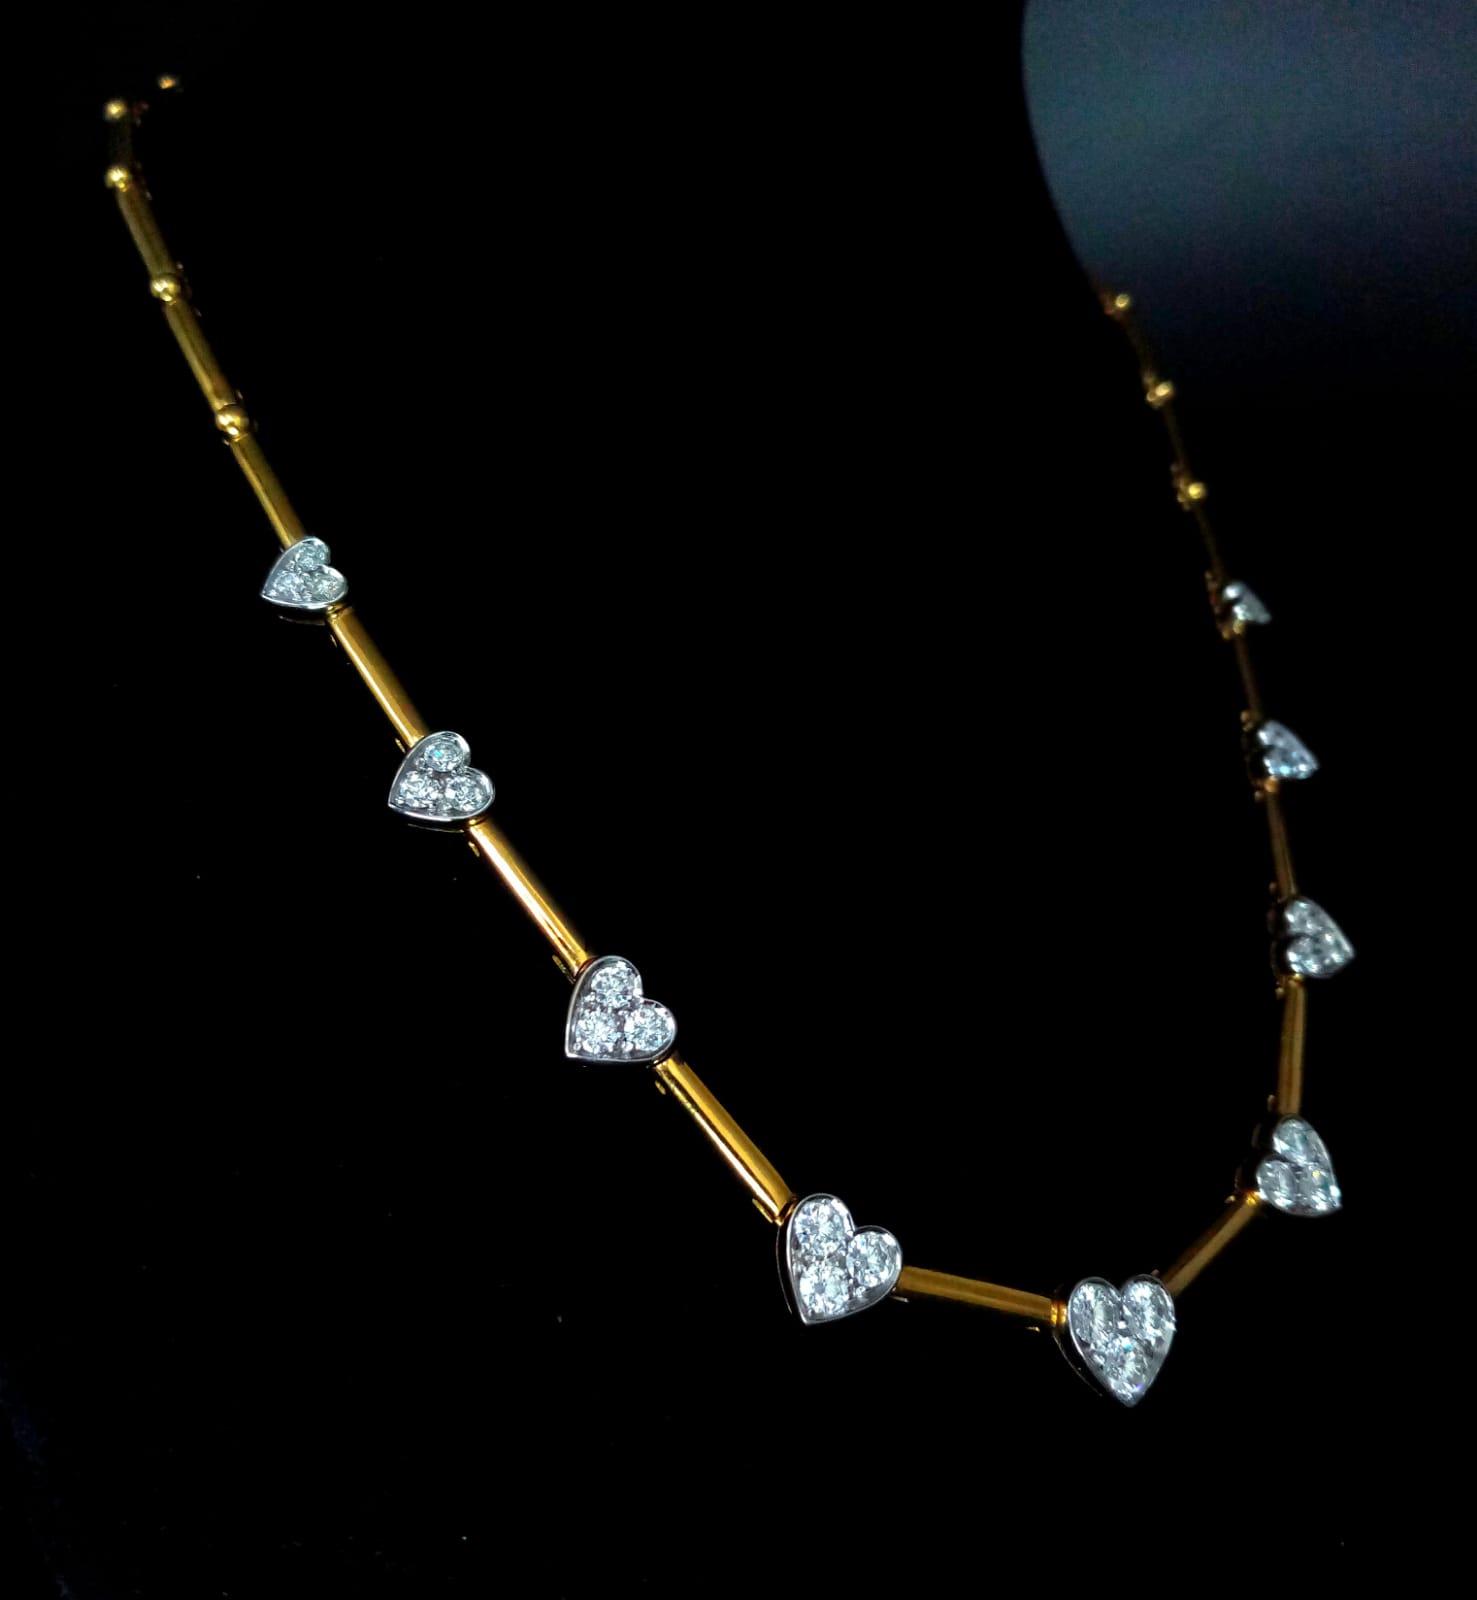 A Gorgeous 18K Gold and Heart-Diamond Necklace and Bracelet Set. The necklace is decorated with - Image 10 of 21